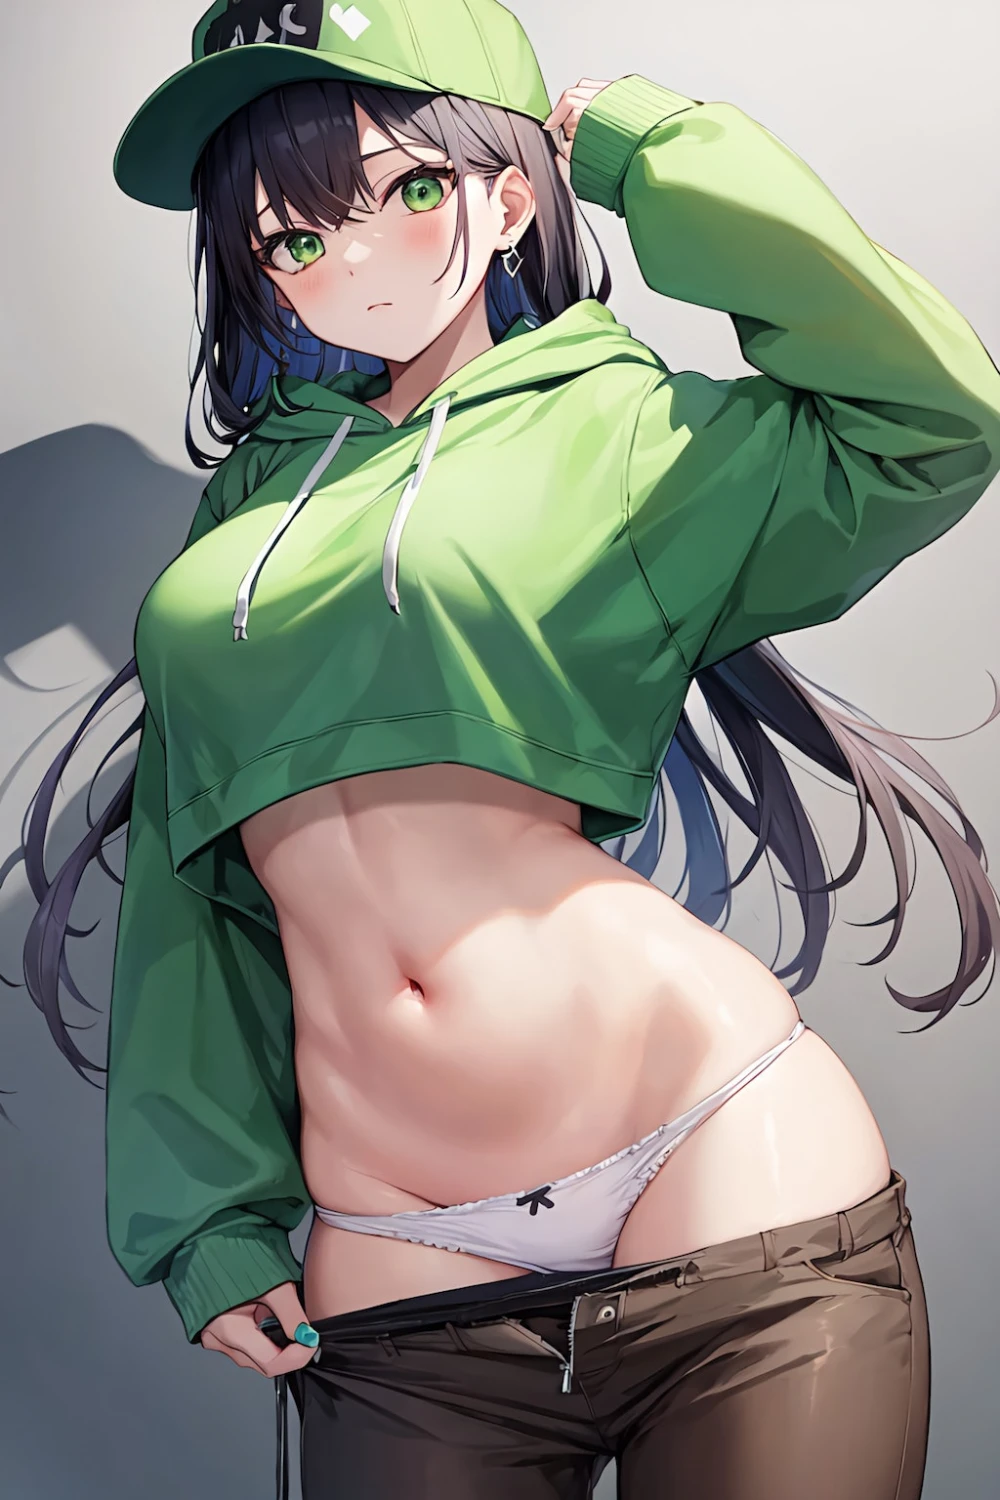 midriff-anime-style-all-ages-7